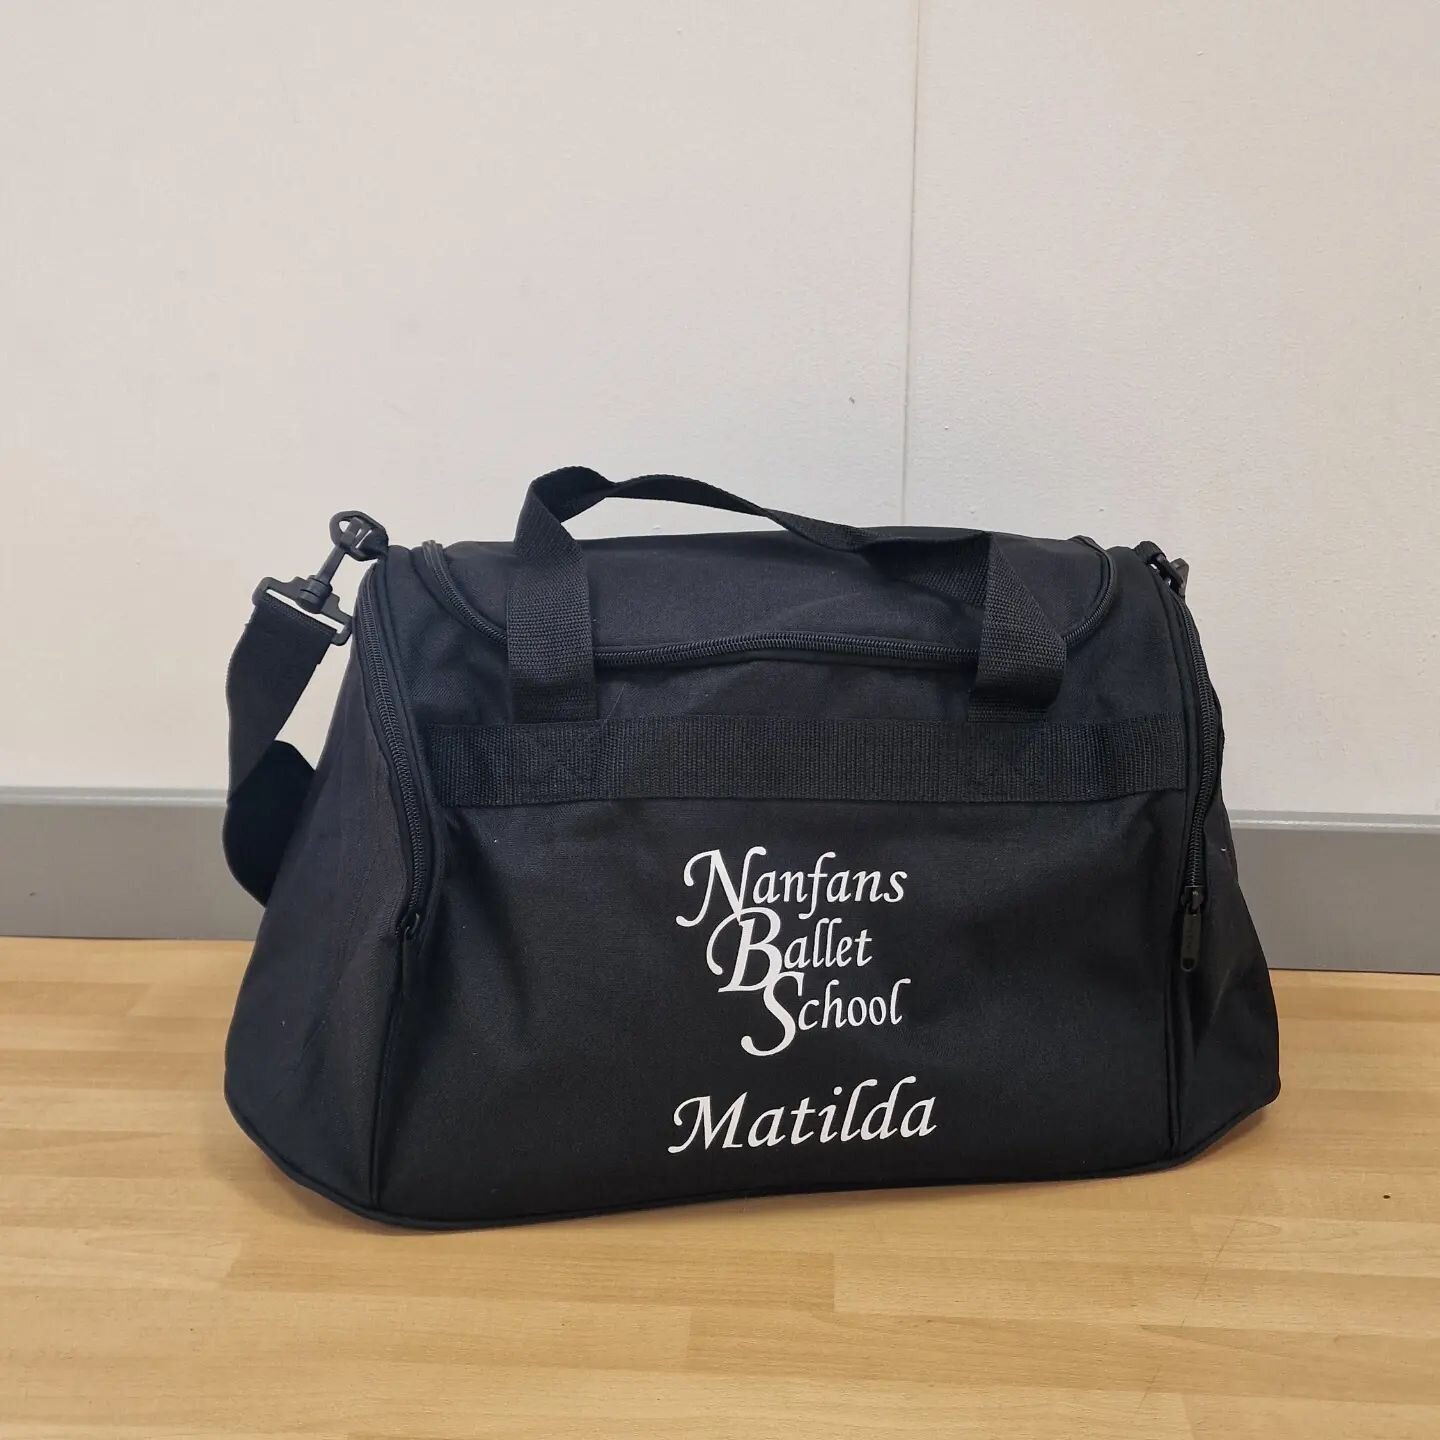 One of our lyrical dancers was so excited to bring her new Nanfans dance bag to class yesterday! 🎉

These are available at the link below if you'd like one too. 

https://rockthedragon.co.uk/dance/nanfans-ballet-school/